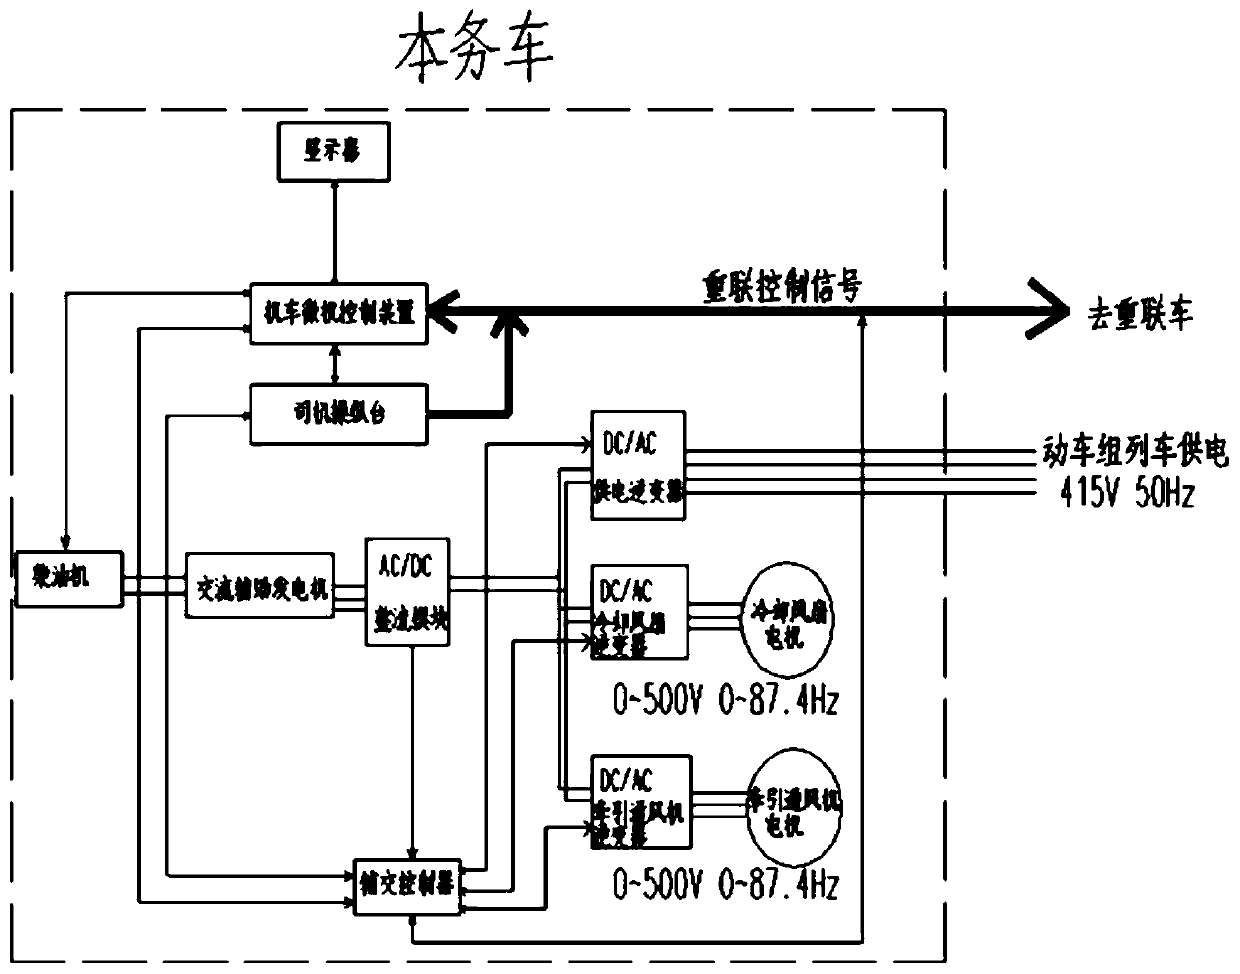 Power concentrated type internal combustion multiple unit train power supply system